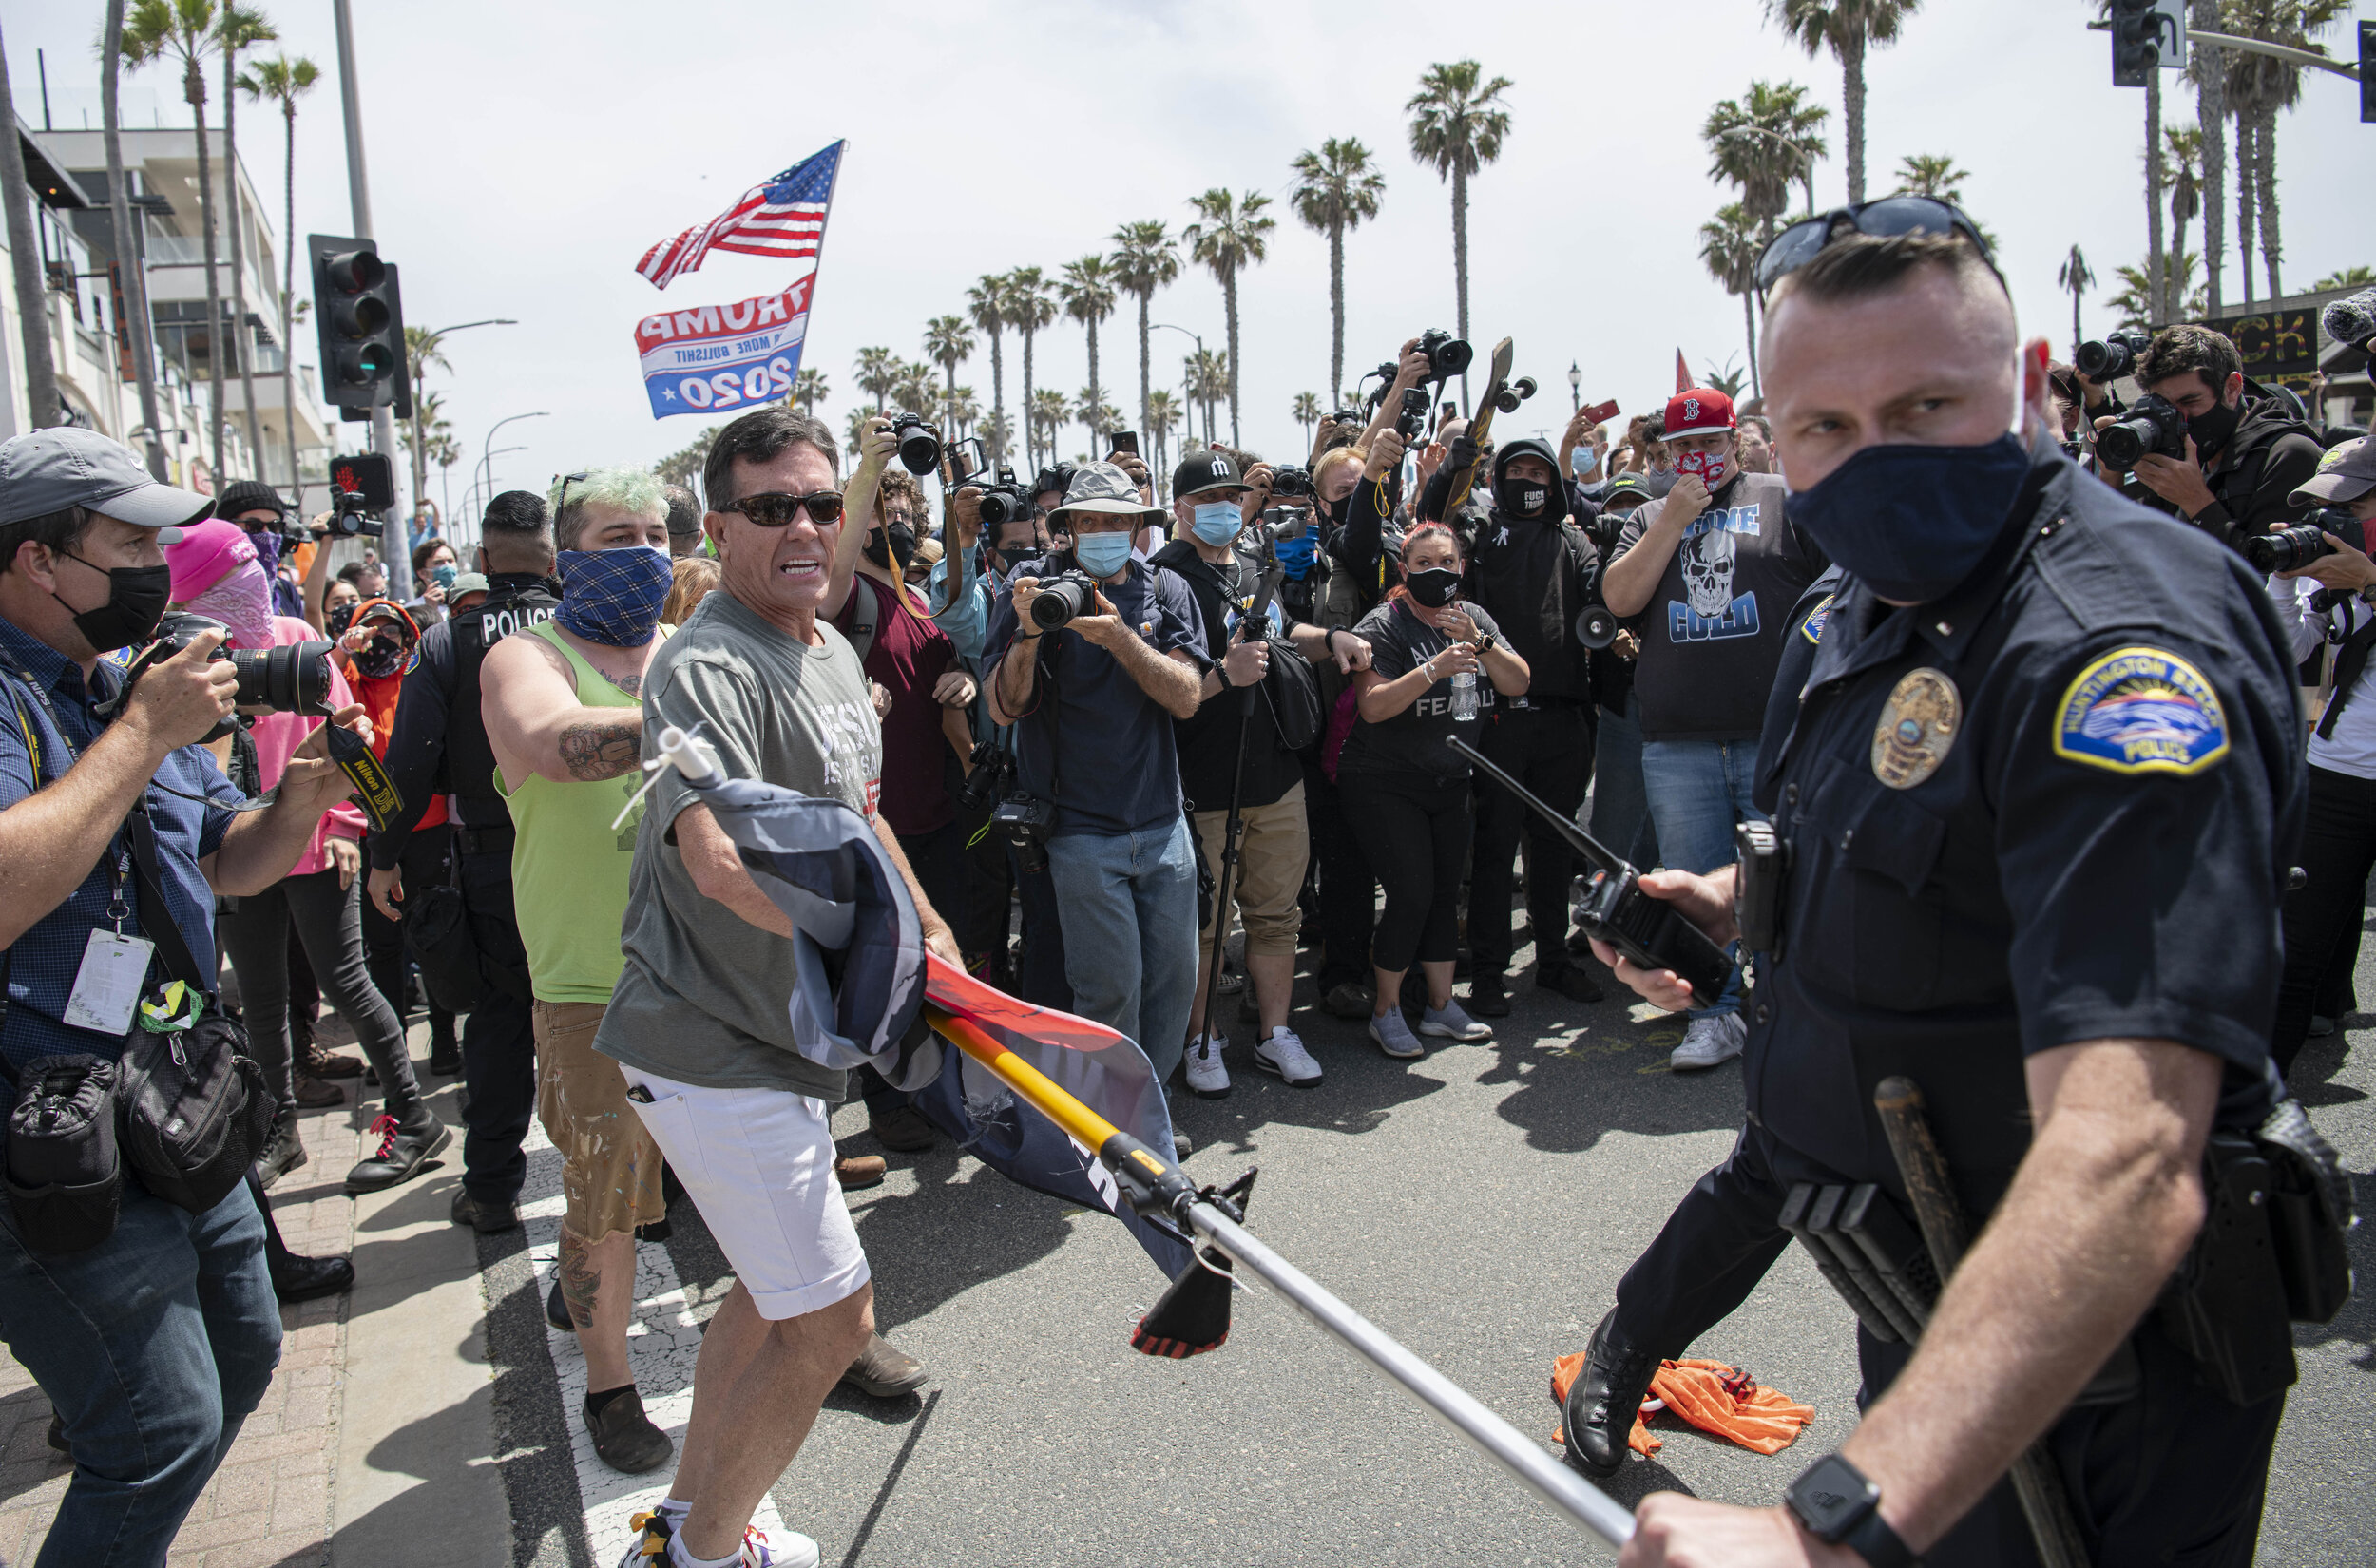  A Protester fights for his flag pole against an angry mob with the assistance of a police officer on March 11, 2021 in Huntington Beach, Calif. at the rally held for Black Lives Matter/ White Lives Matter members. (Jon Putman / The Corsair) 